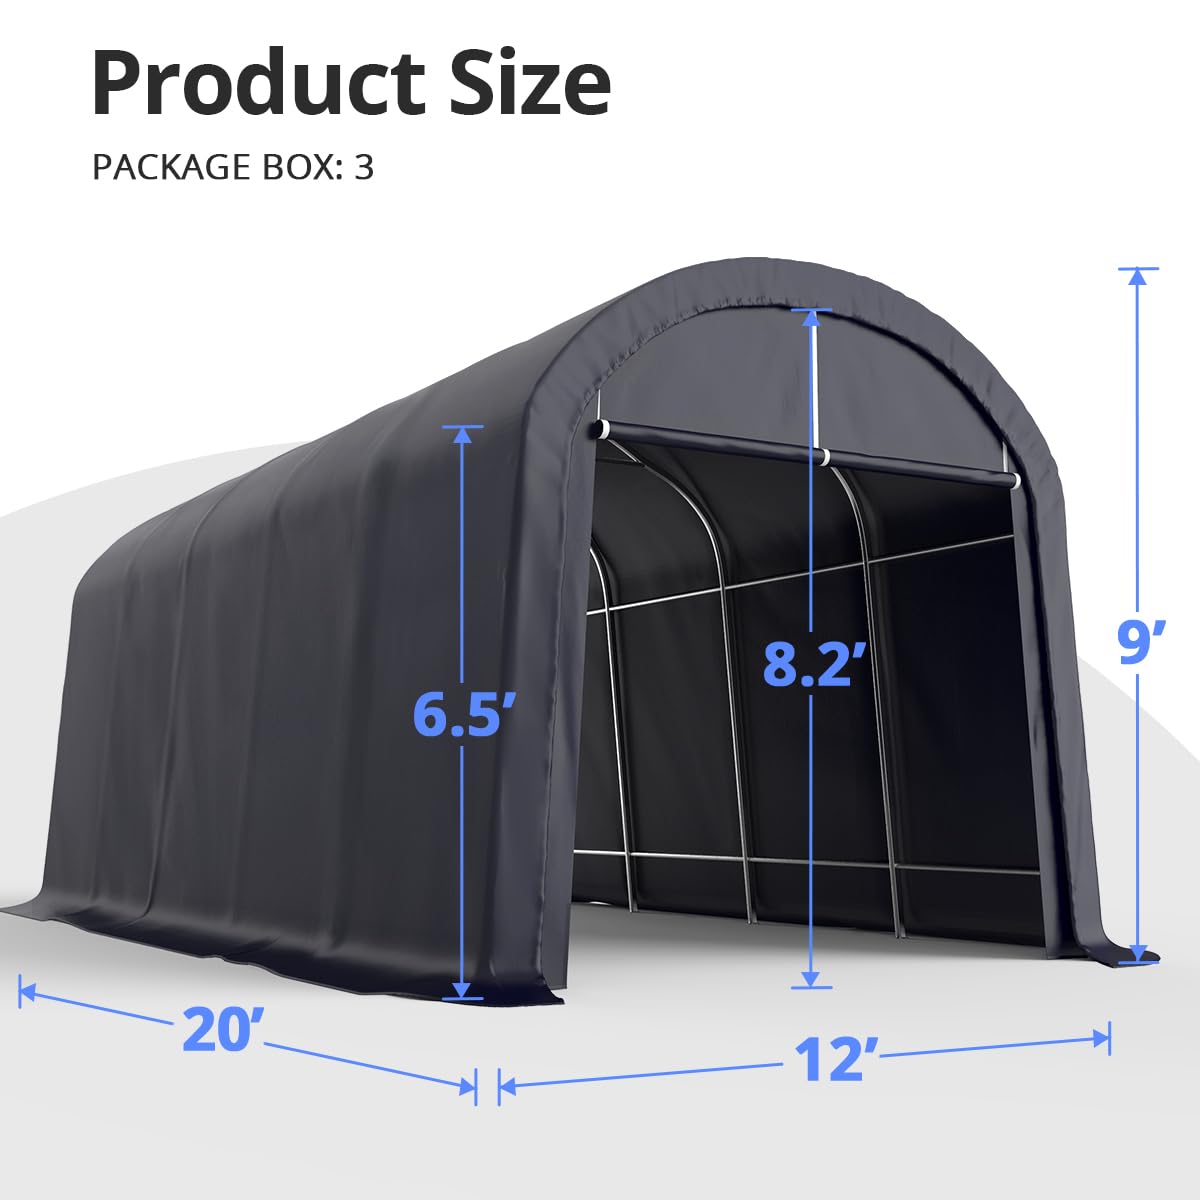 KING BIRD 12' x 20' Round Style Garage Shelter Anti-Snow Heavy Duty Storage Shelter Carport Portable Canopy Storage Shelter Shed for Boat, Patio Furniture and Lawn Mower-Dark Gray 12'X20' Dark Gray